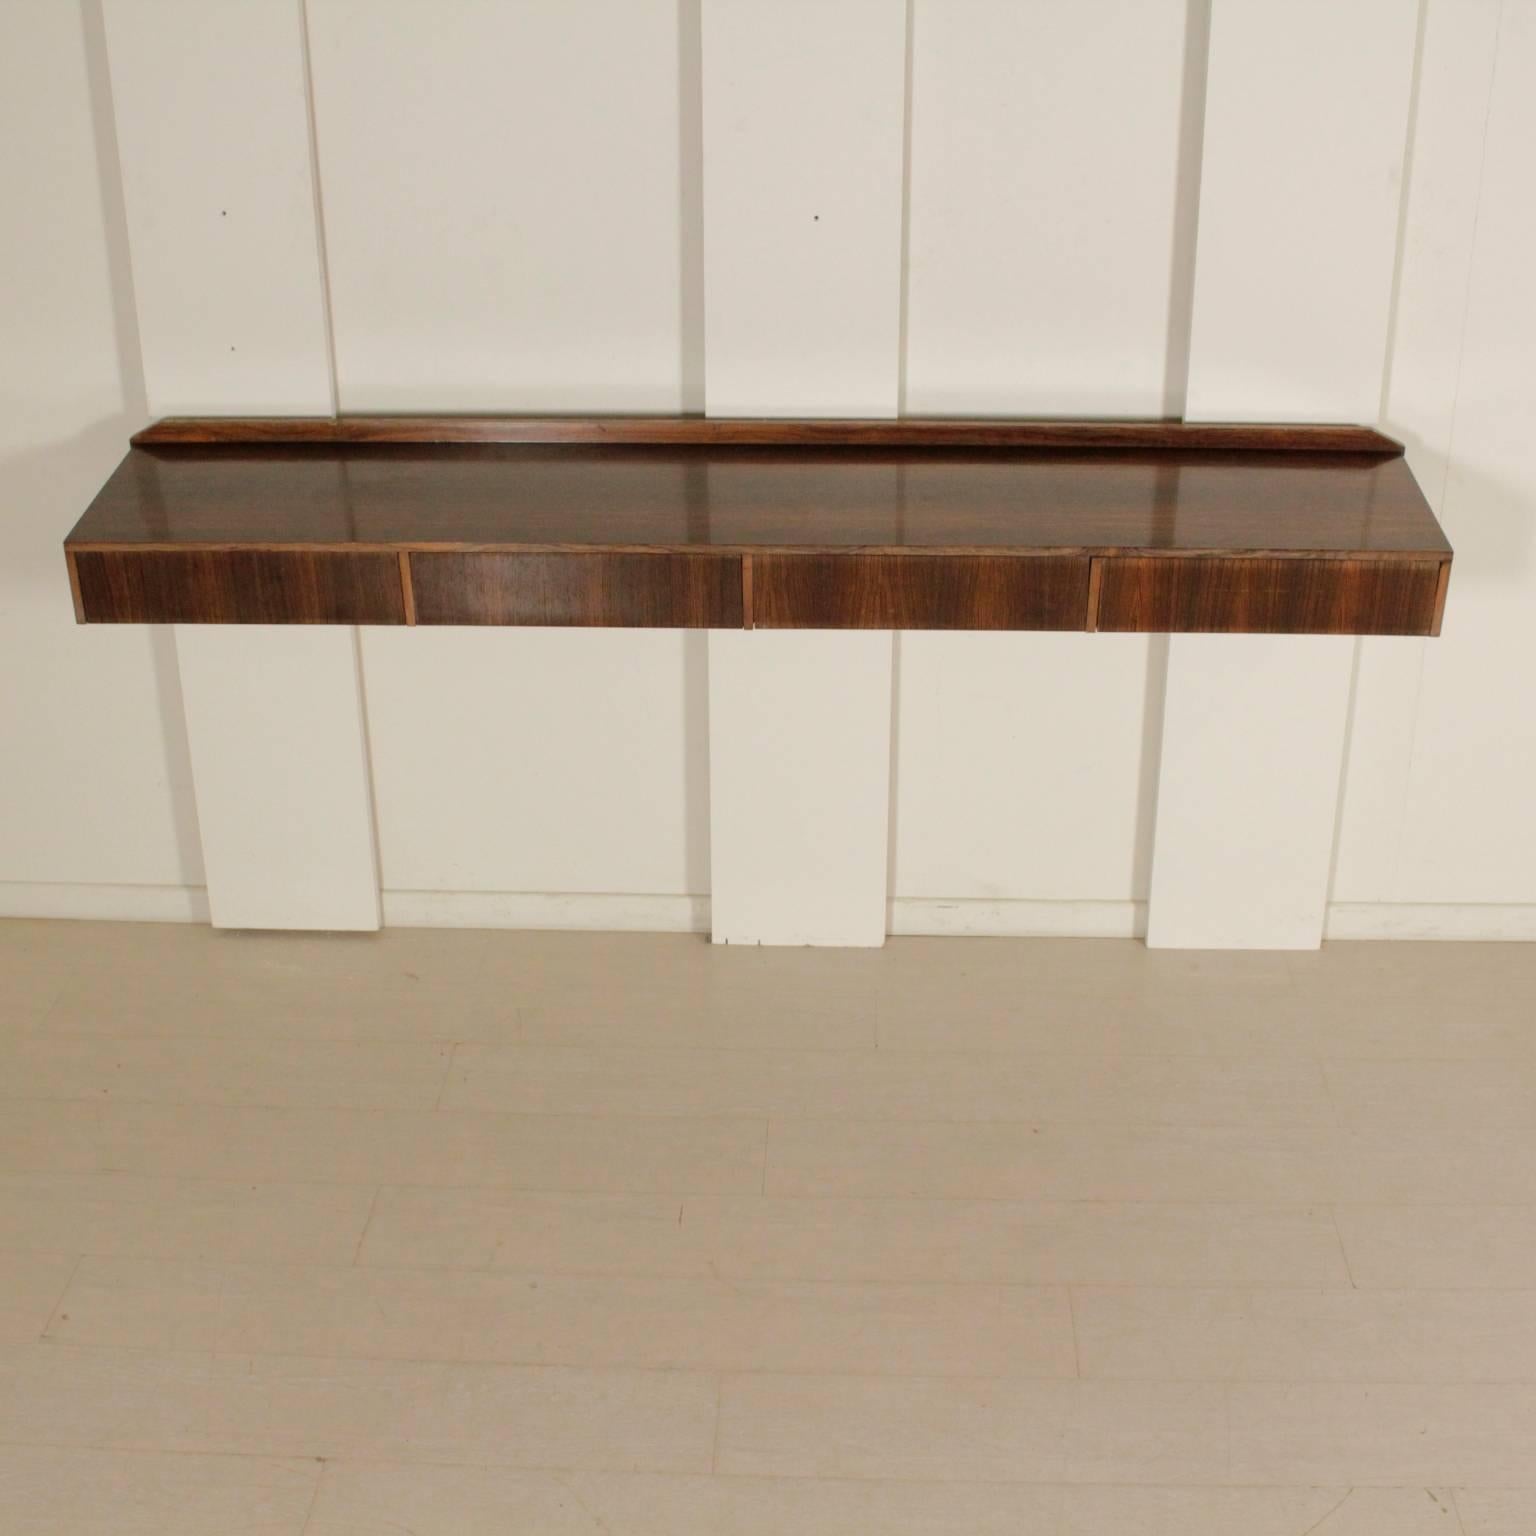 Wall-mounted console, rosewood veneer. Manufactured in Italy, 1960s.